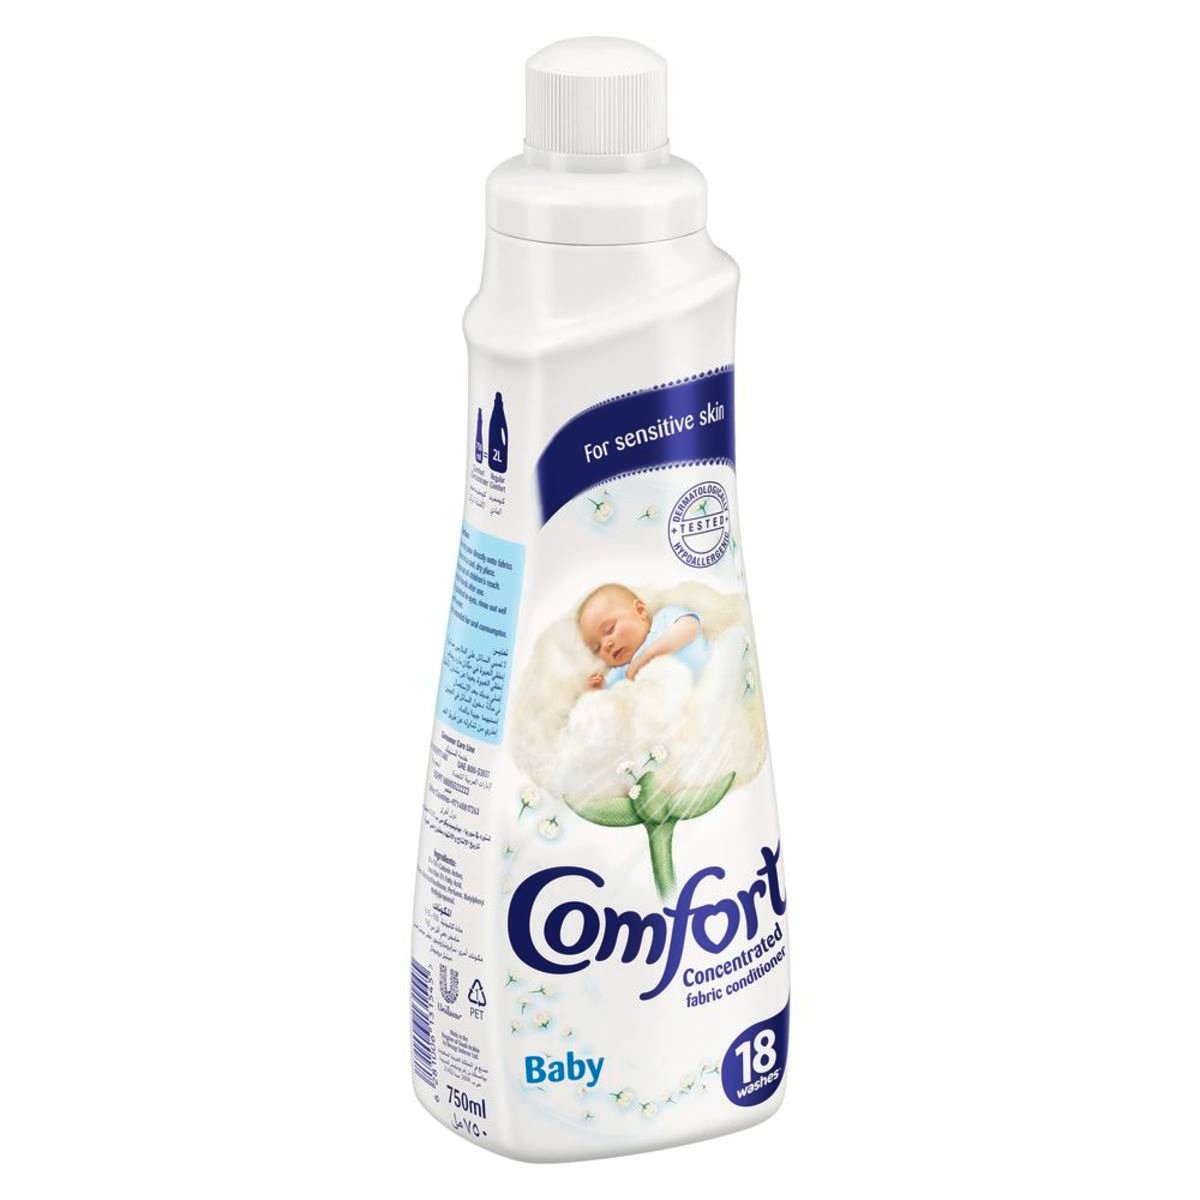 Comfort Concentrated Fabric Softener Baby 750ml